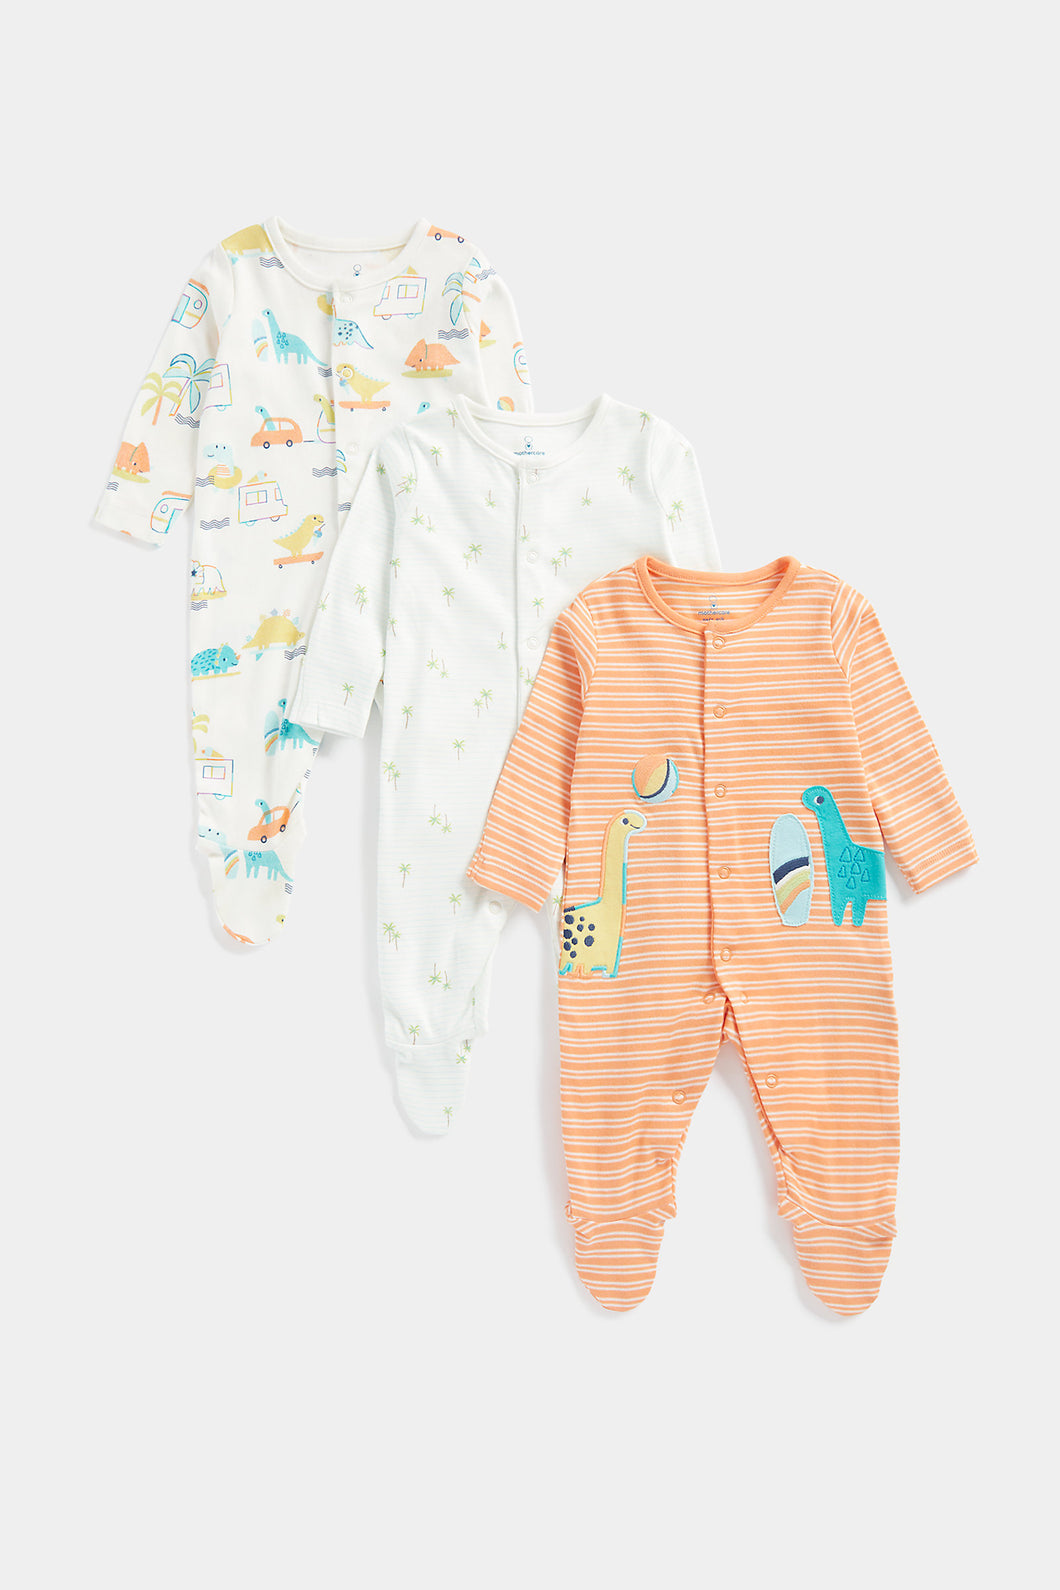 Mothercare Dino Surf All-in-Ones - 3 Pack